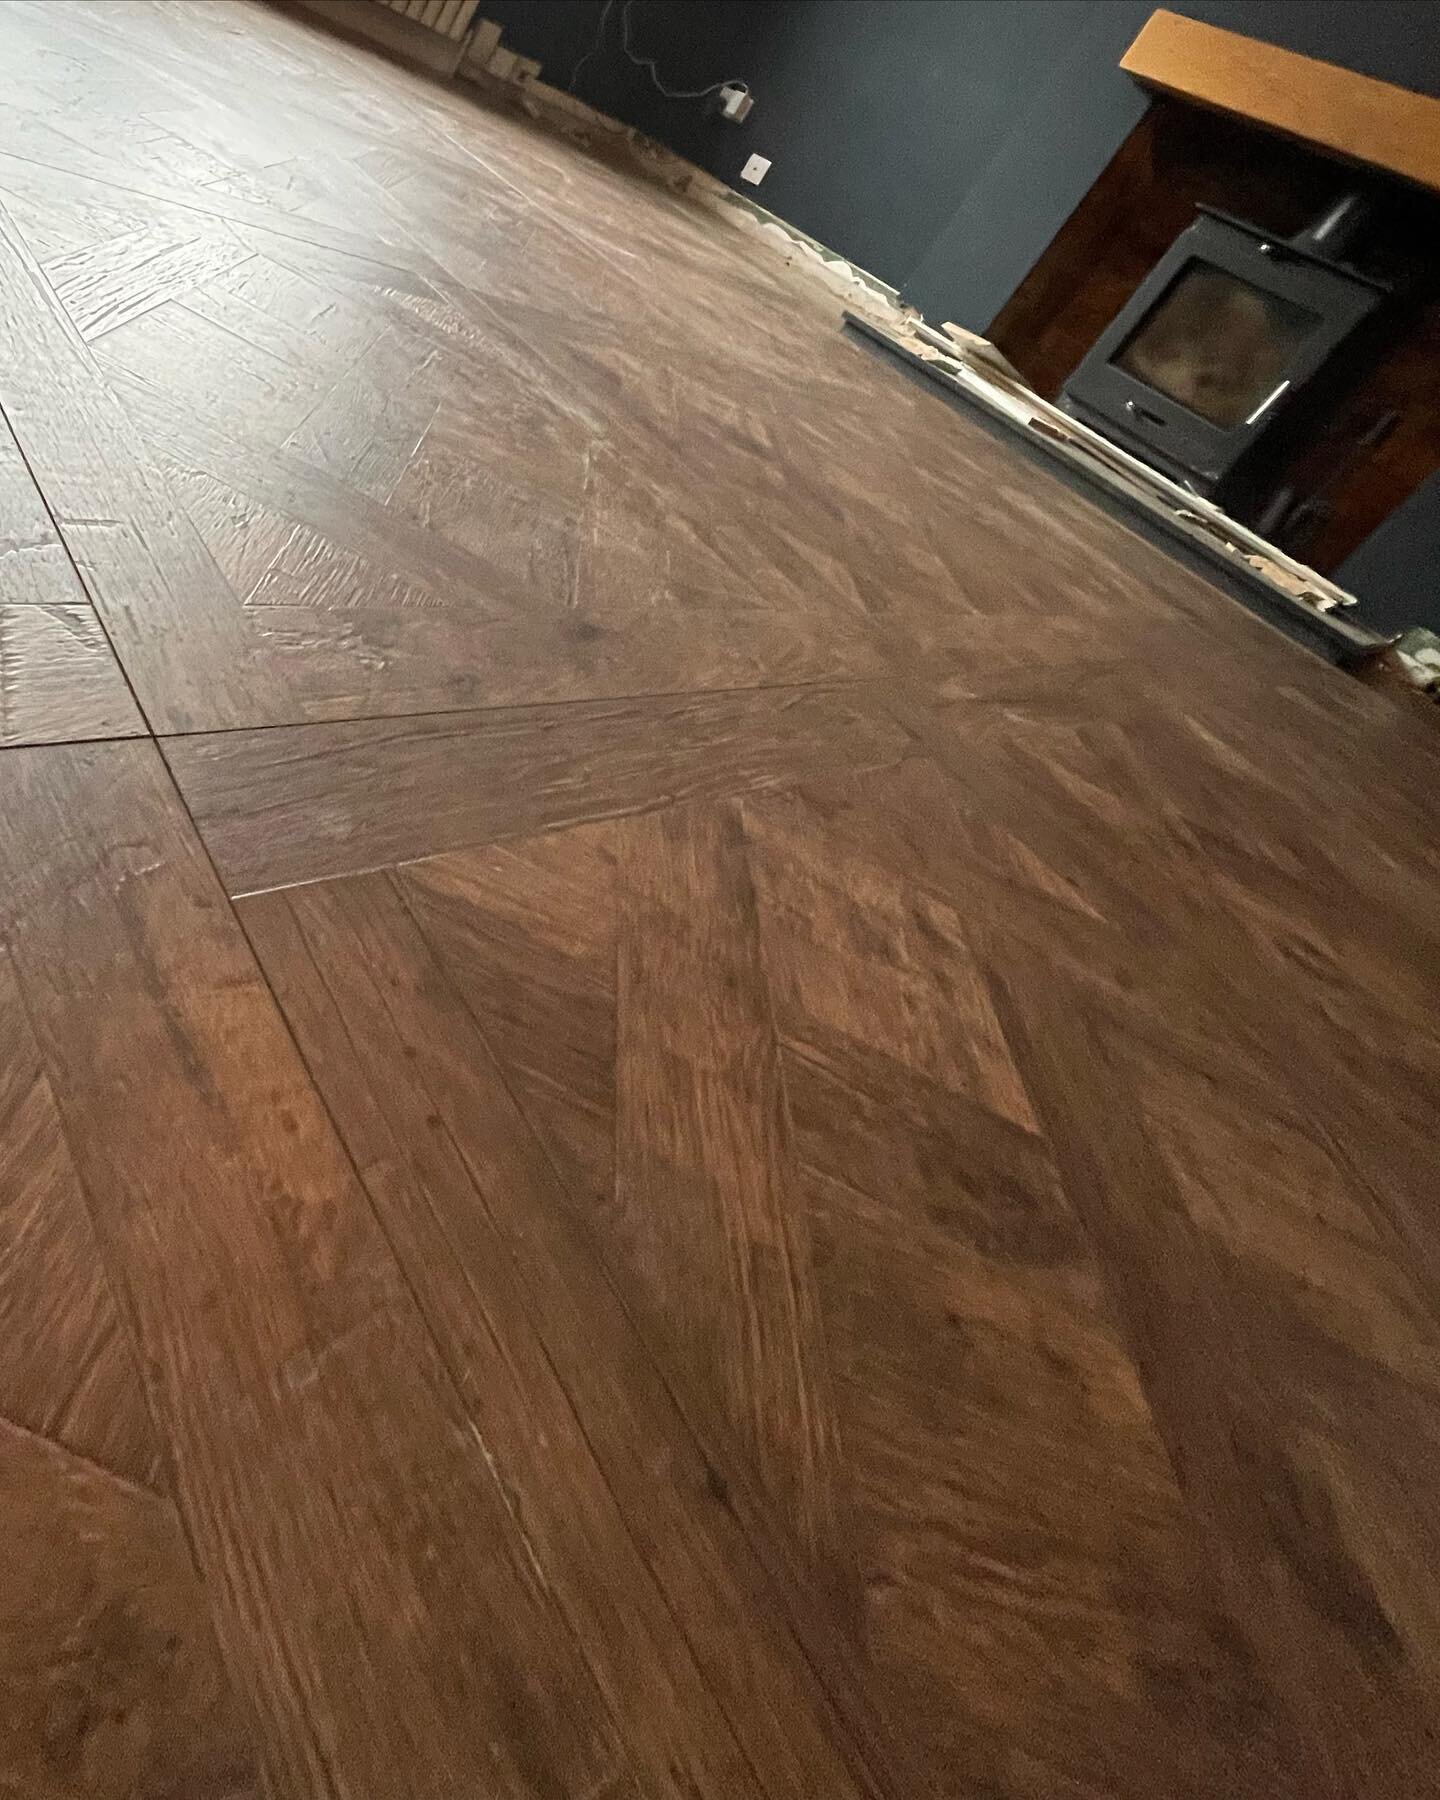 A recent job for a family in Warwick. Laminate from quickstep&rsquo;s impressive patterns range. Beautiful timeless parquet pattern that looks as if it&rsquo;s always been there. 

____________________________

* Carpets
* LVT
* Laminate 
* Vinyl 
__